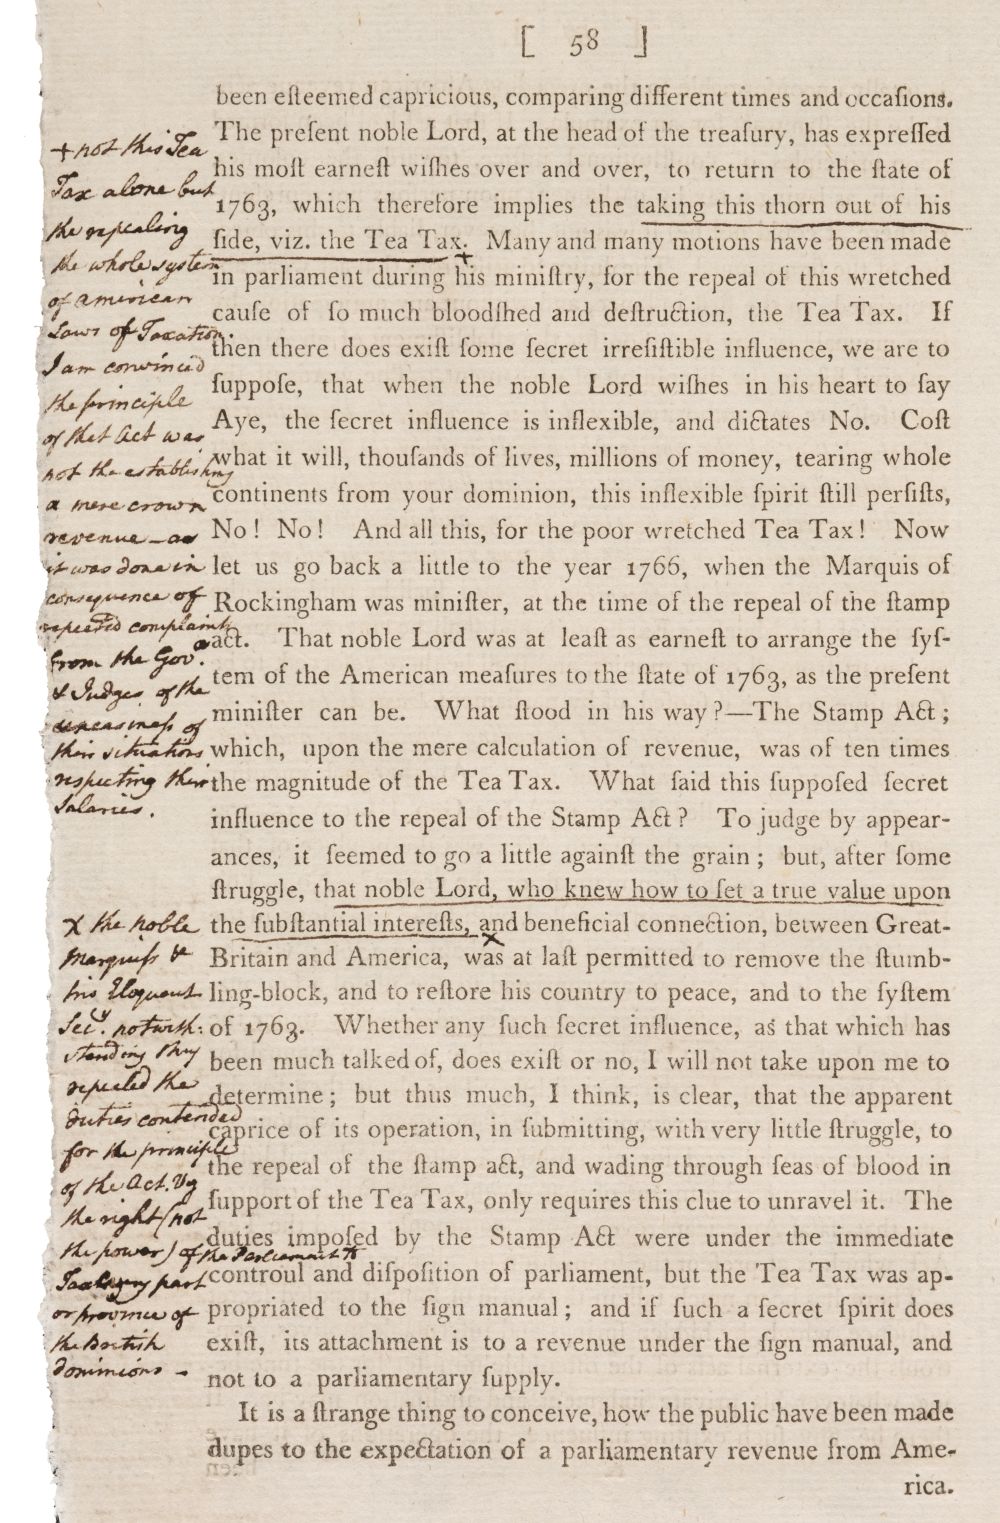 American Revolution - (Hartley, David). Letters on the American War, 6th edition(?), 1779